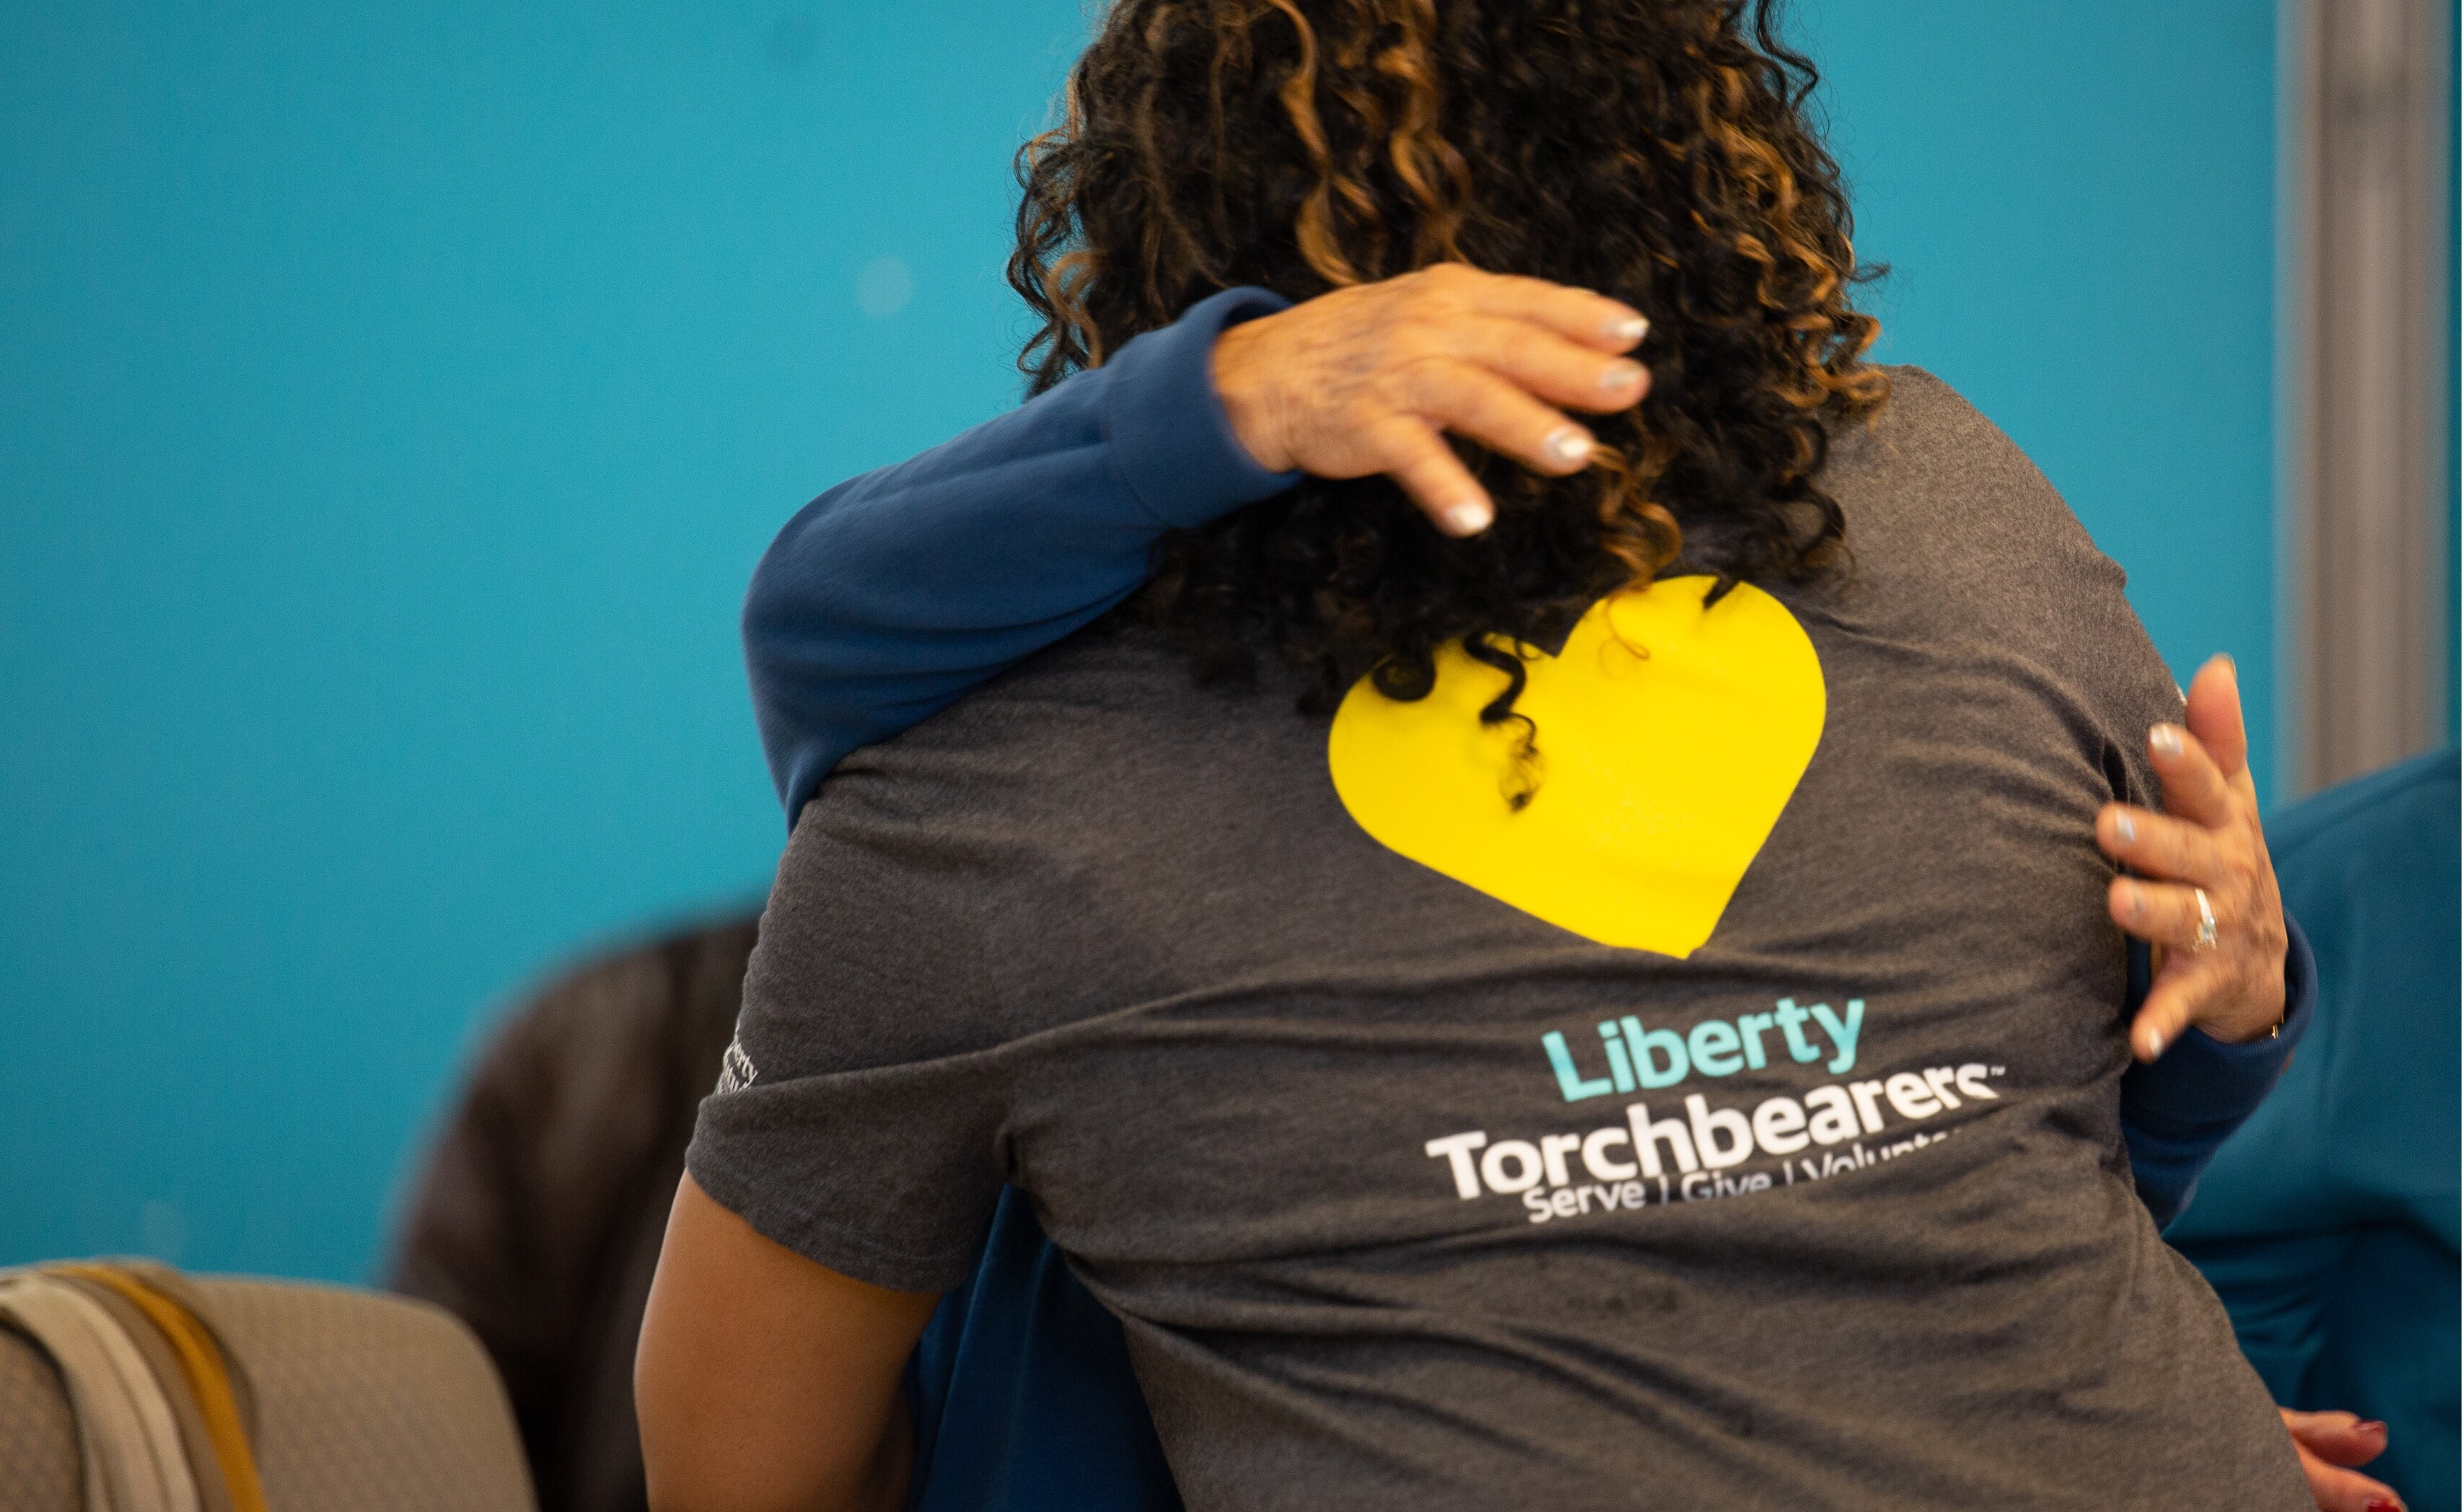 Two individuals at Serve with Liberty embracing